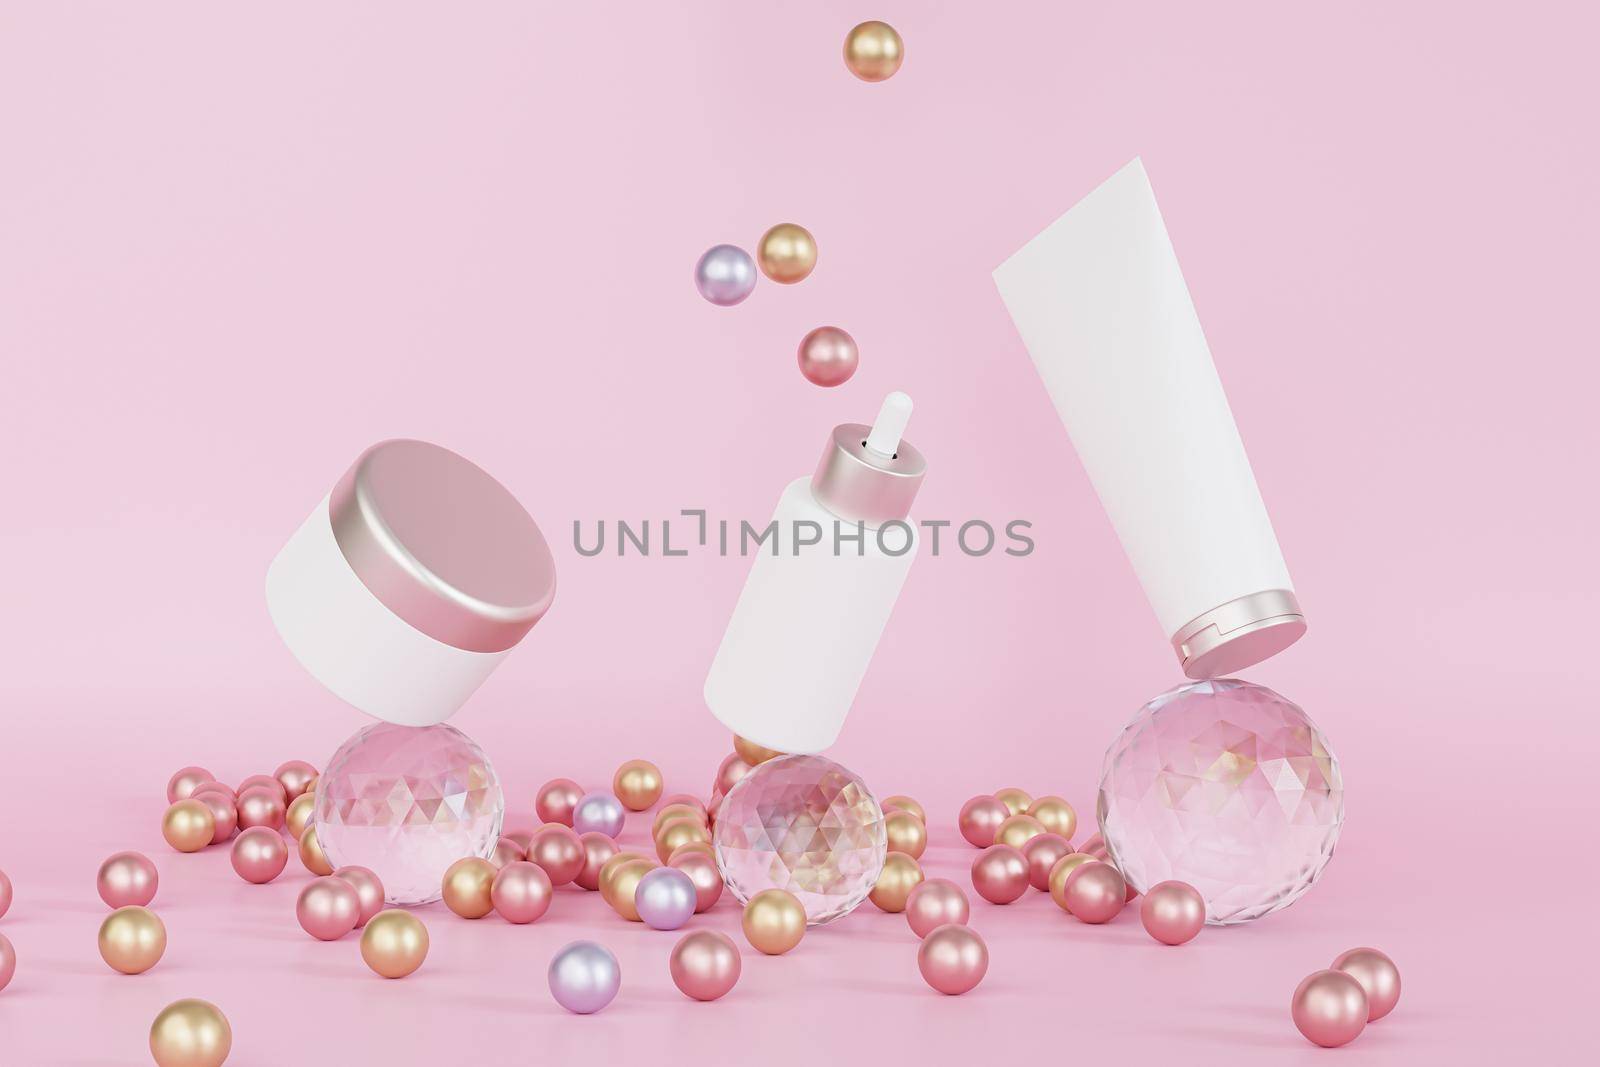 Mockup dropper bottle, lotion tube and cream jar for cosmetics products or advertising balancing on glass spheres, 3d illustration render